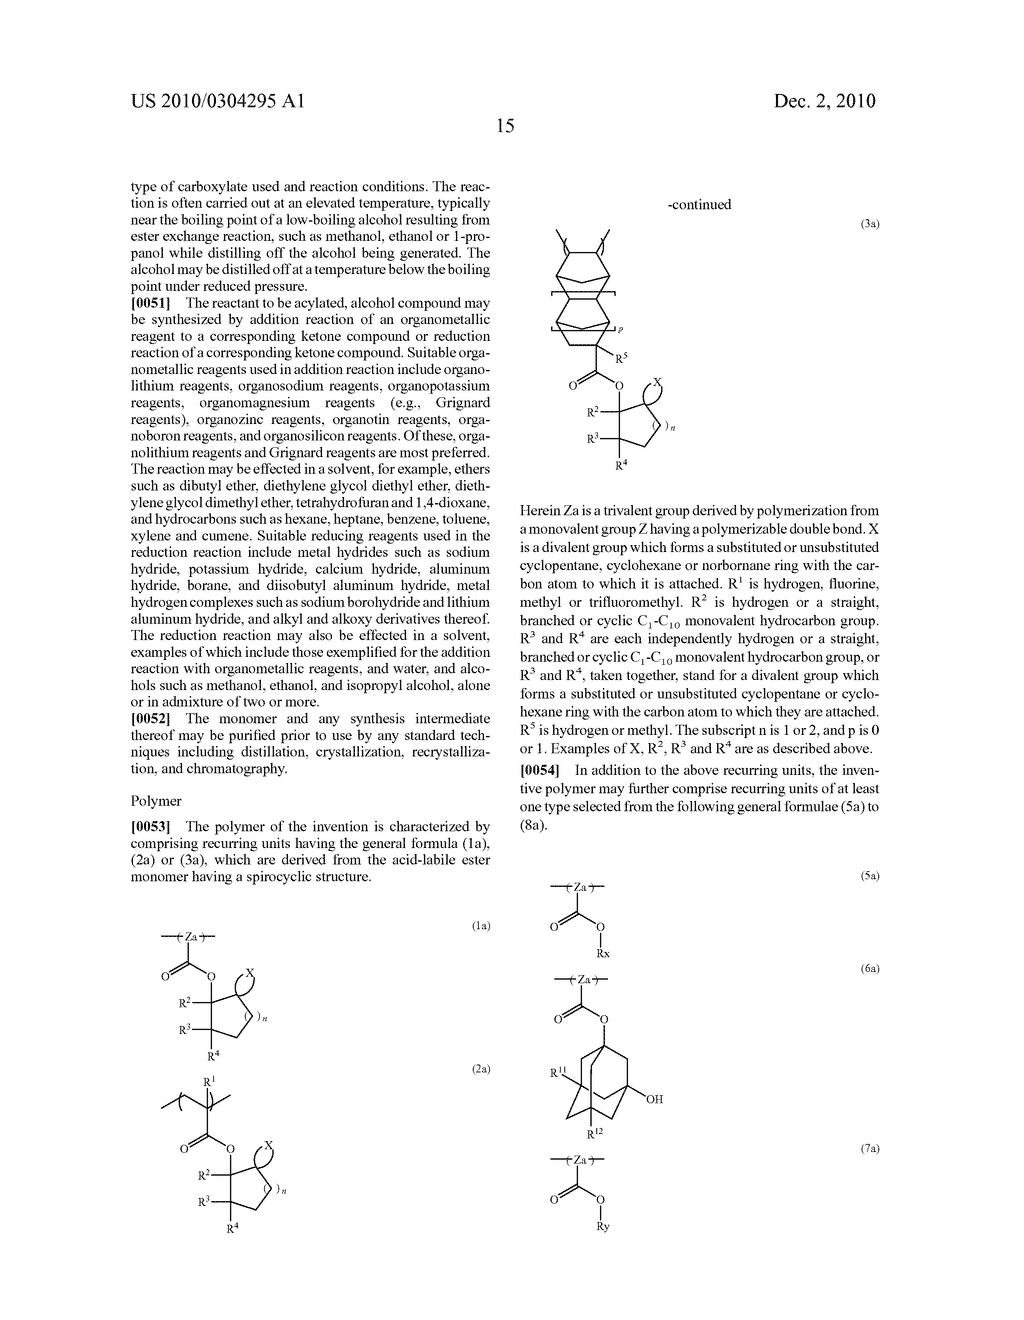 ACID-LABILE ESTER MONOMER HAVING SPIROCYCLIC STRUCTURE, POLYMER, RESIST COMPOSITION, AND PATTERNING PROCESS - diagram, schematic, and image 16